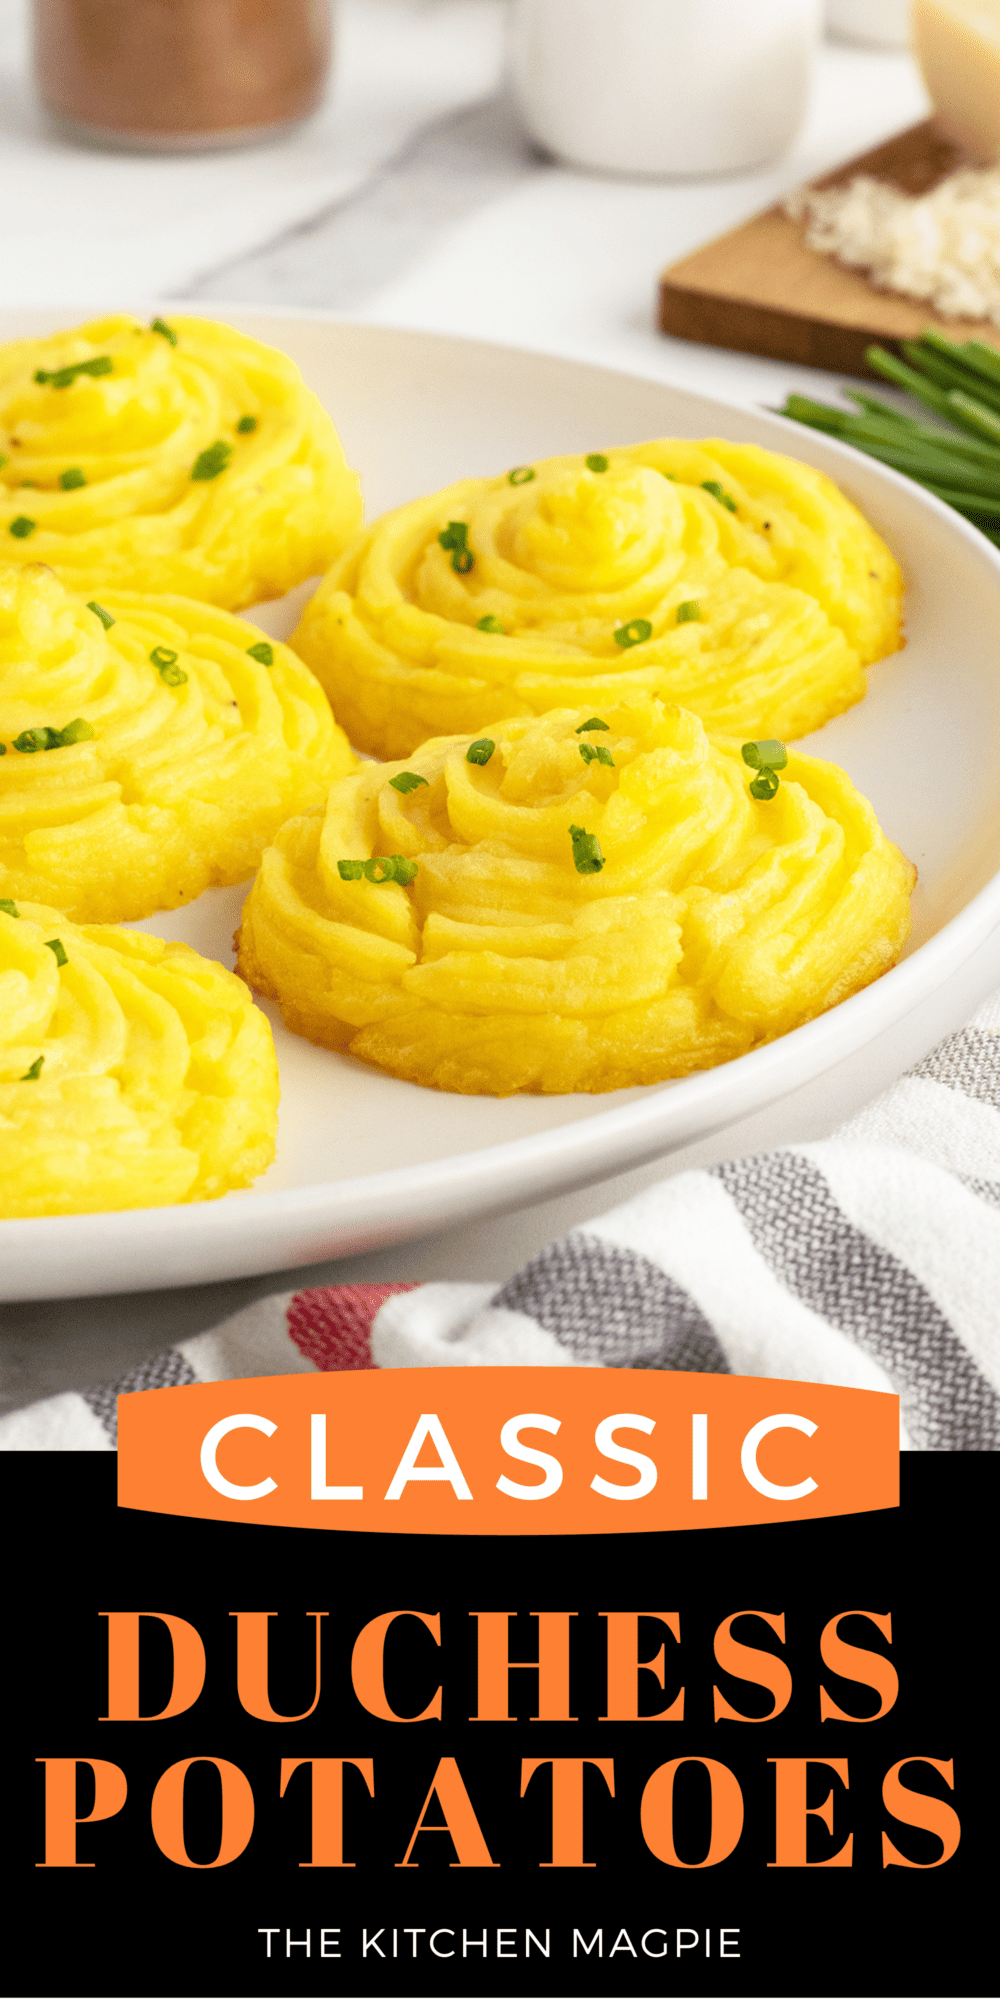 Duchess Potatoes for a flashy appetizer or just for a decadent side dish, these attractive potatoes are surprisingly suited to home cooking.